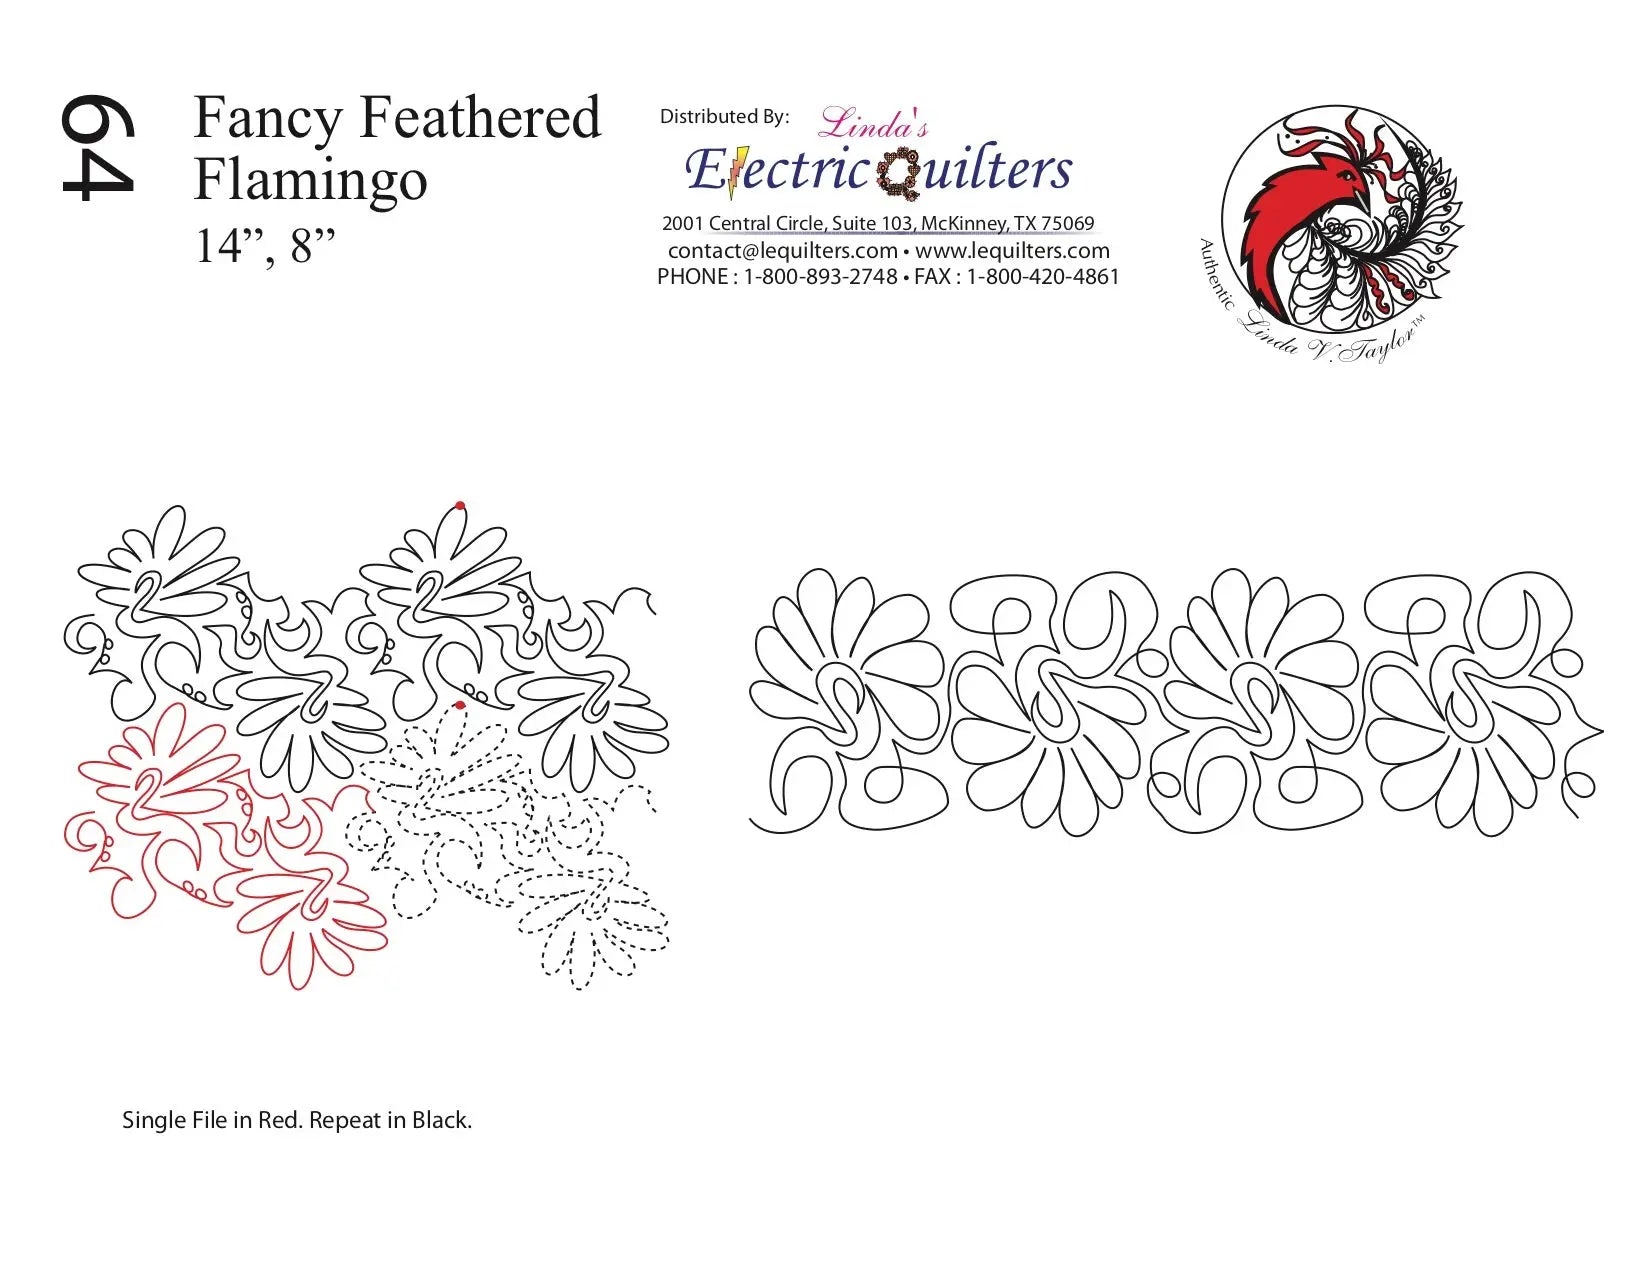 064 Fancy Feathered Flamingo Pantograph by Linda V. Taylor